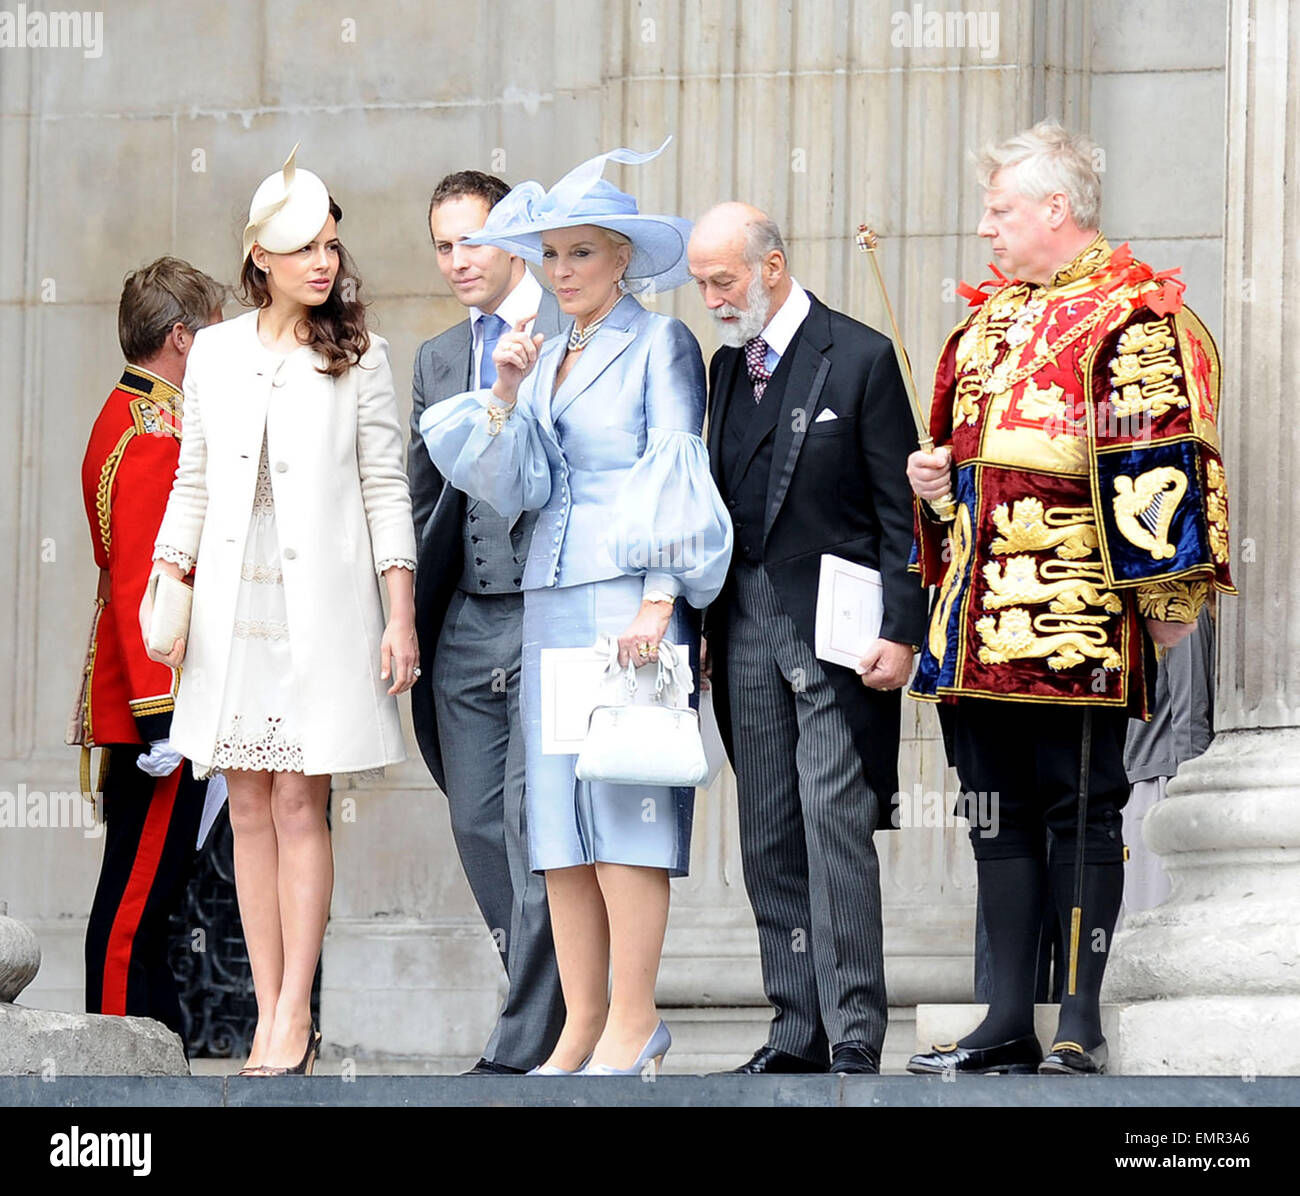 Lord And Lady Frederick Windsor High Resolution Stock Photography and ...